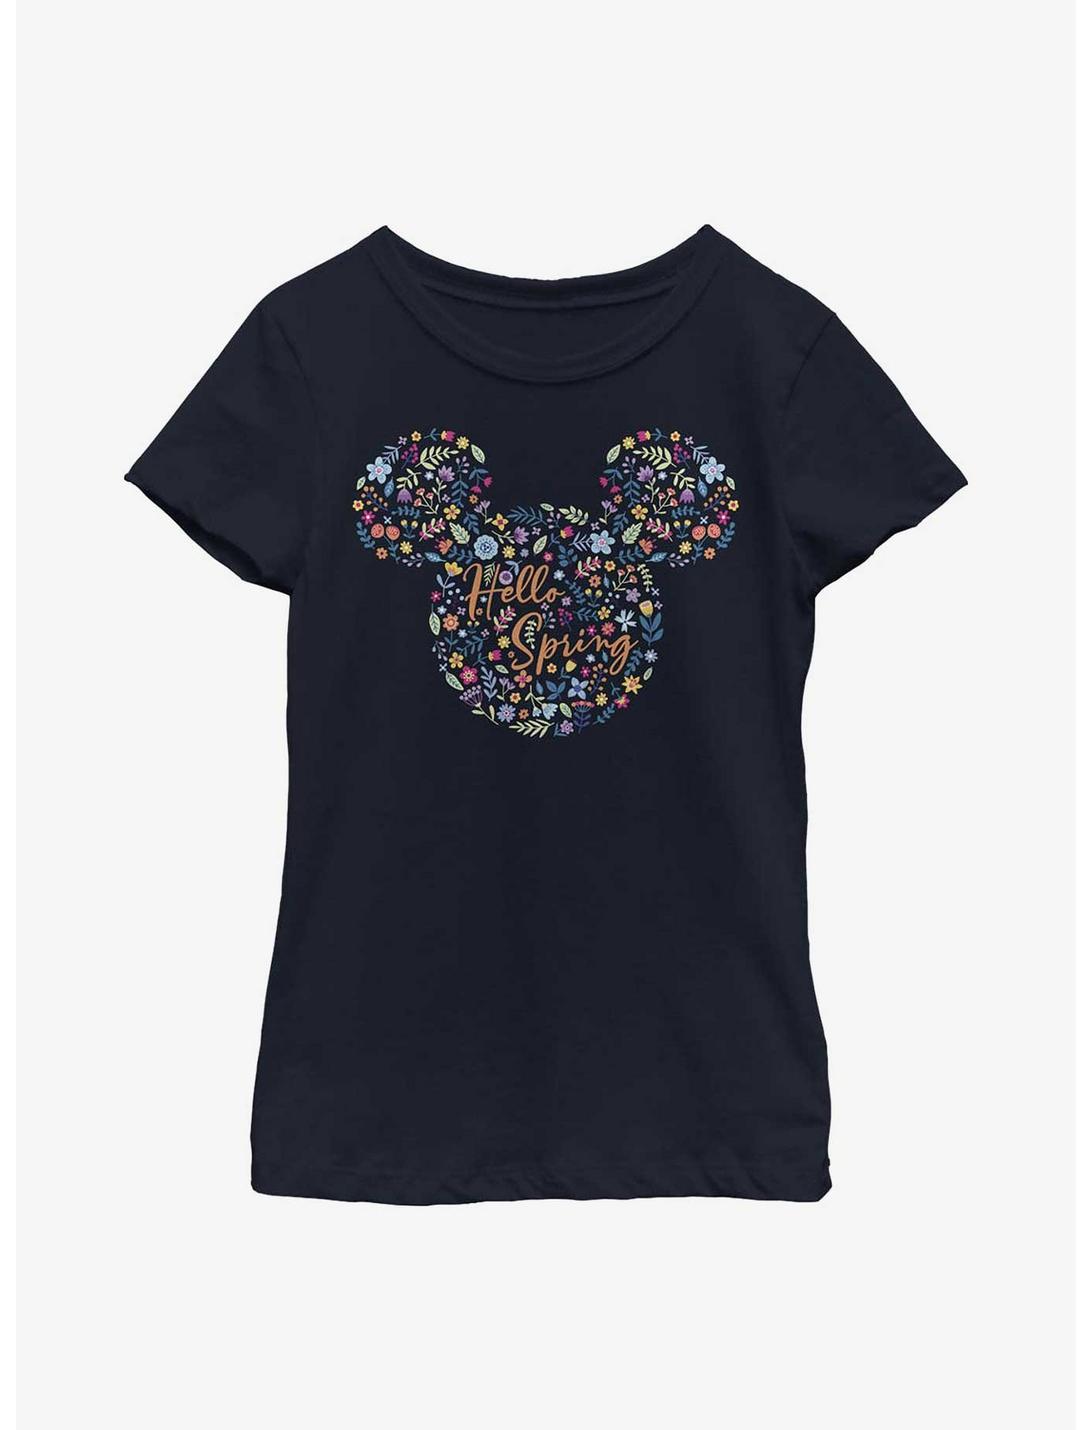 Disney Mickey Mouse Floral Ears Youth Girls T-Shirt, NAVY, hi-res